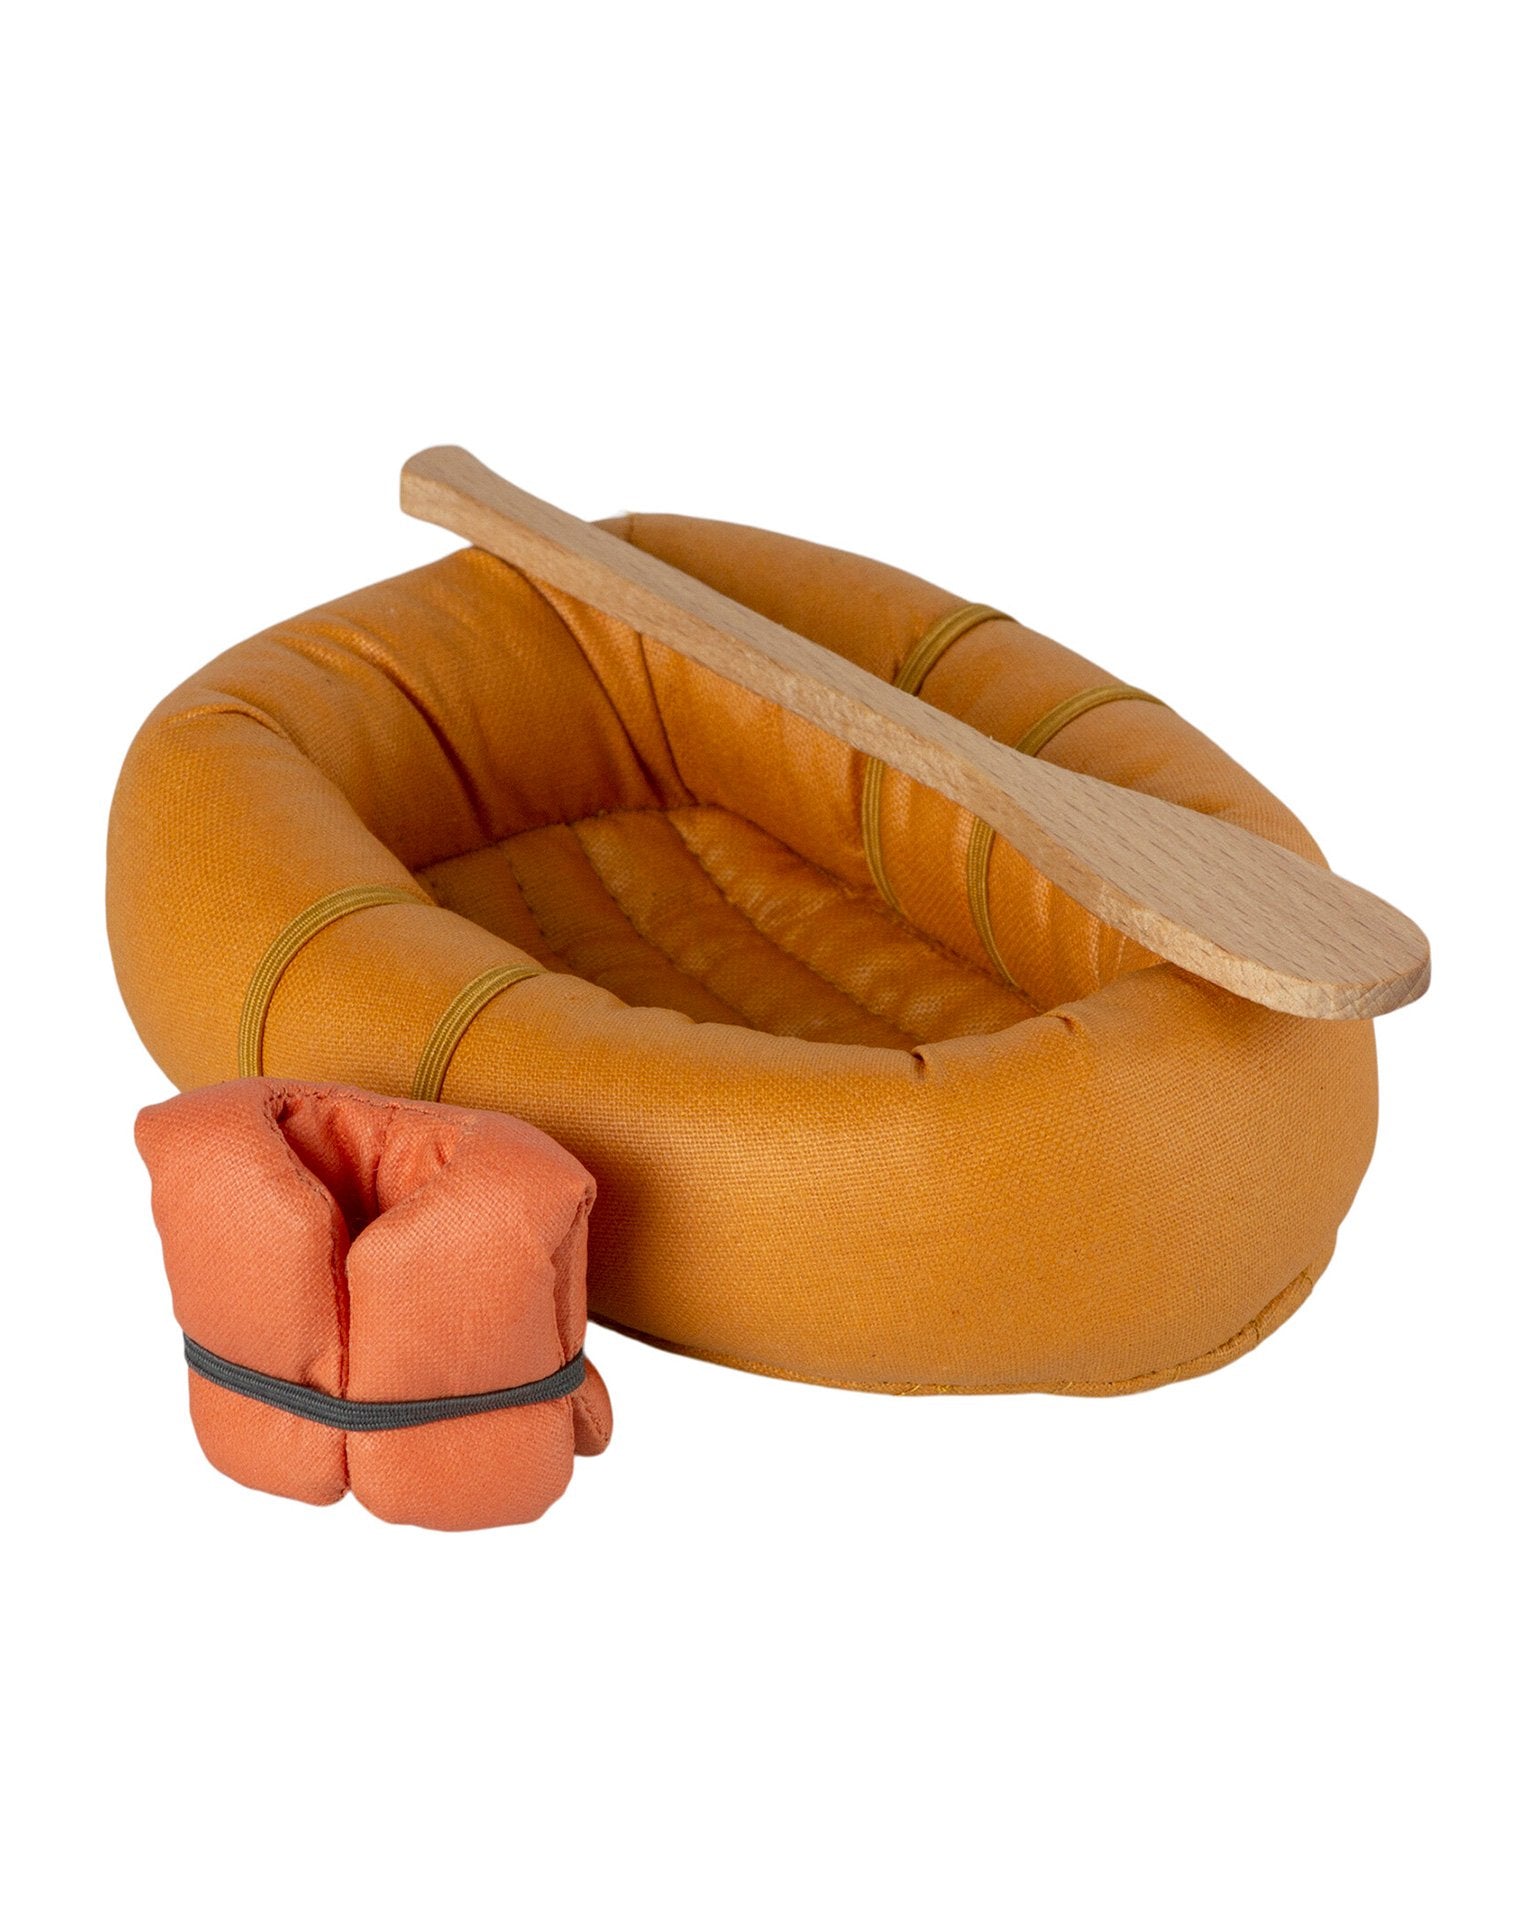 Little maileg play rubber boat in dusty yellow